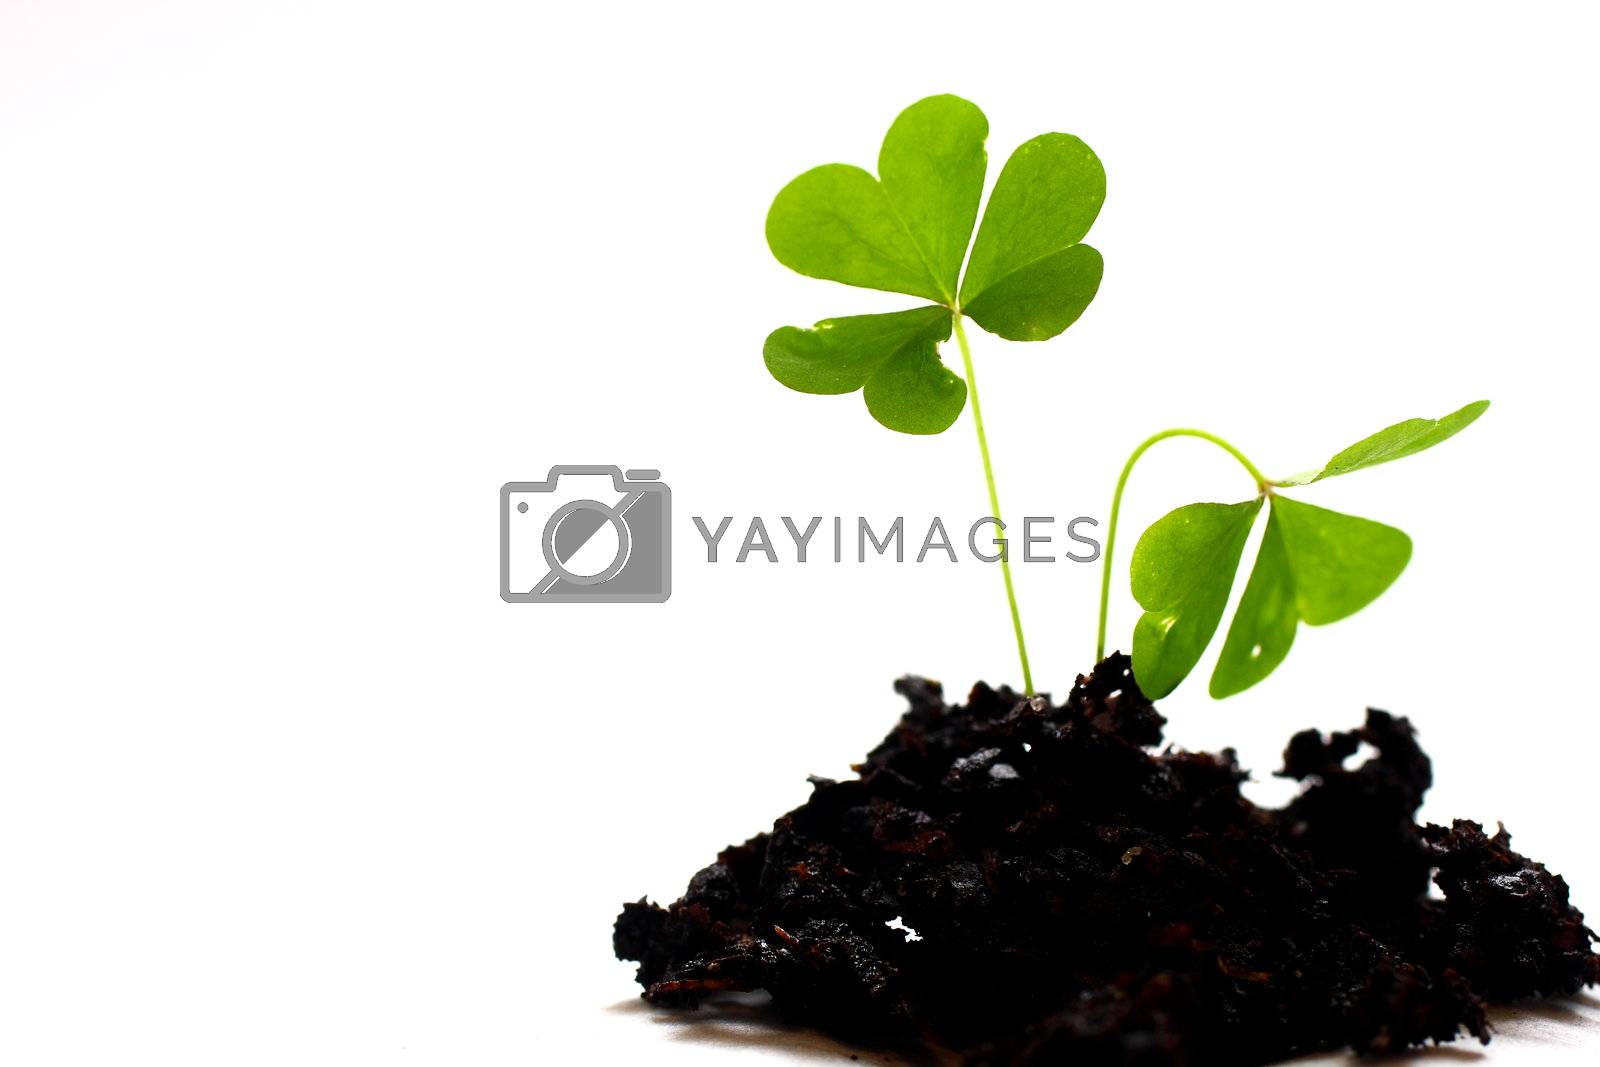 Royalty free image of Three Leaf Clover by dersankt